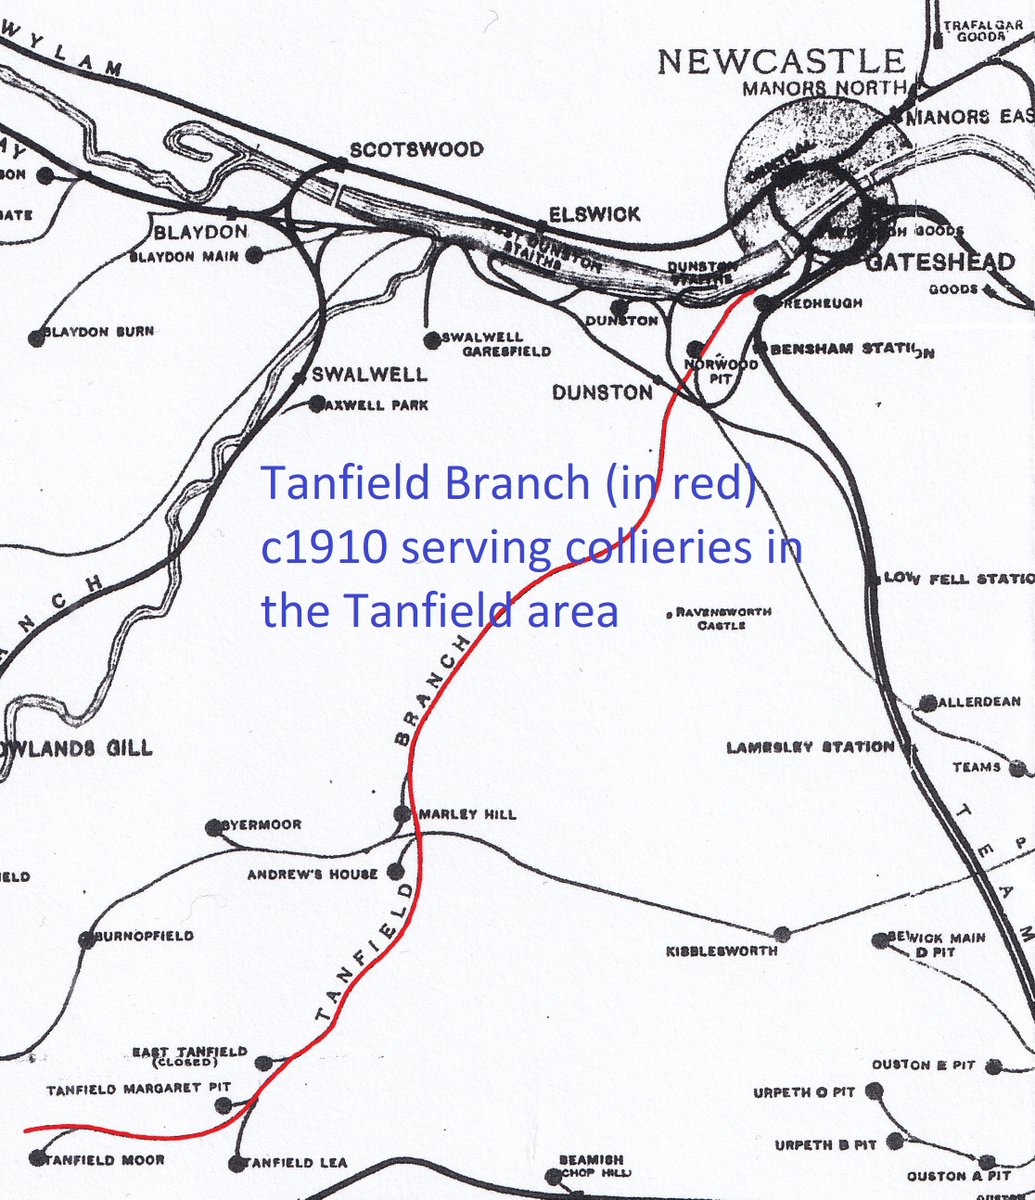 1/15  #NTiHoR Hi, I’m Rob and welcome to my paper 'Wooden rails to steel wheels – the development of the Tanfield branch in the 19th & 20th centuries as a microcosm of mineral haulage in the North East of England' looking at the  @TanfieldRailway in County Durham/Gateshead